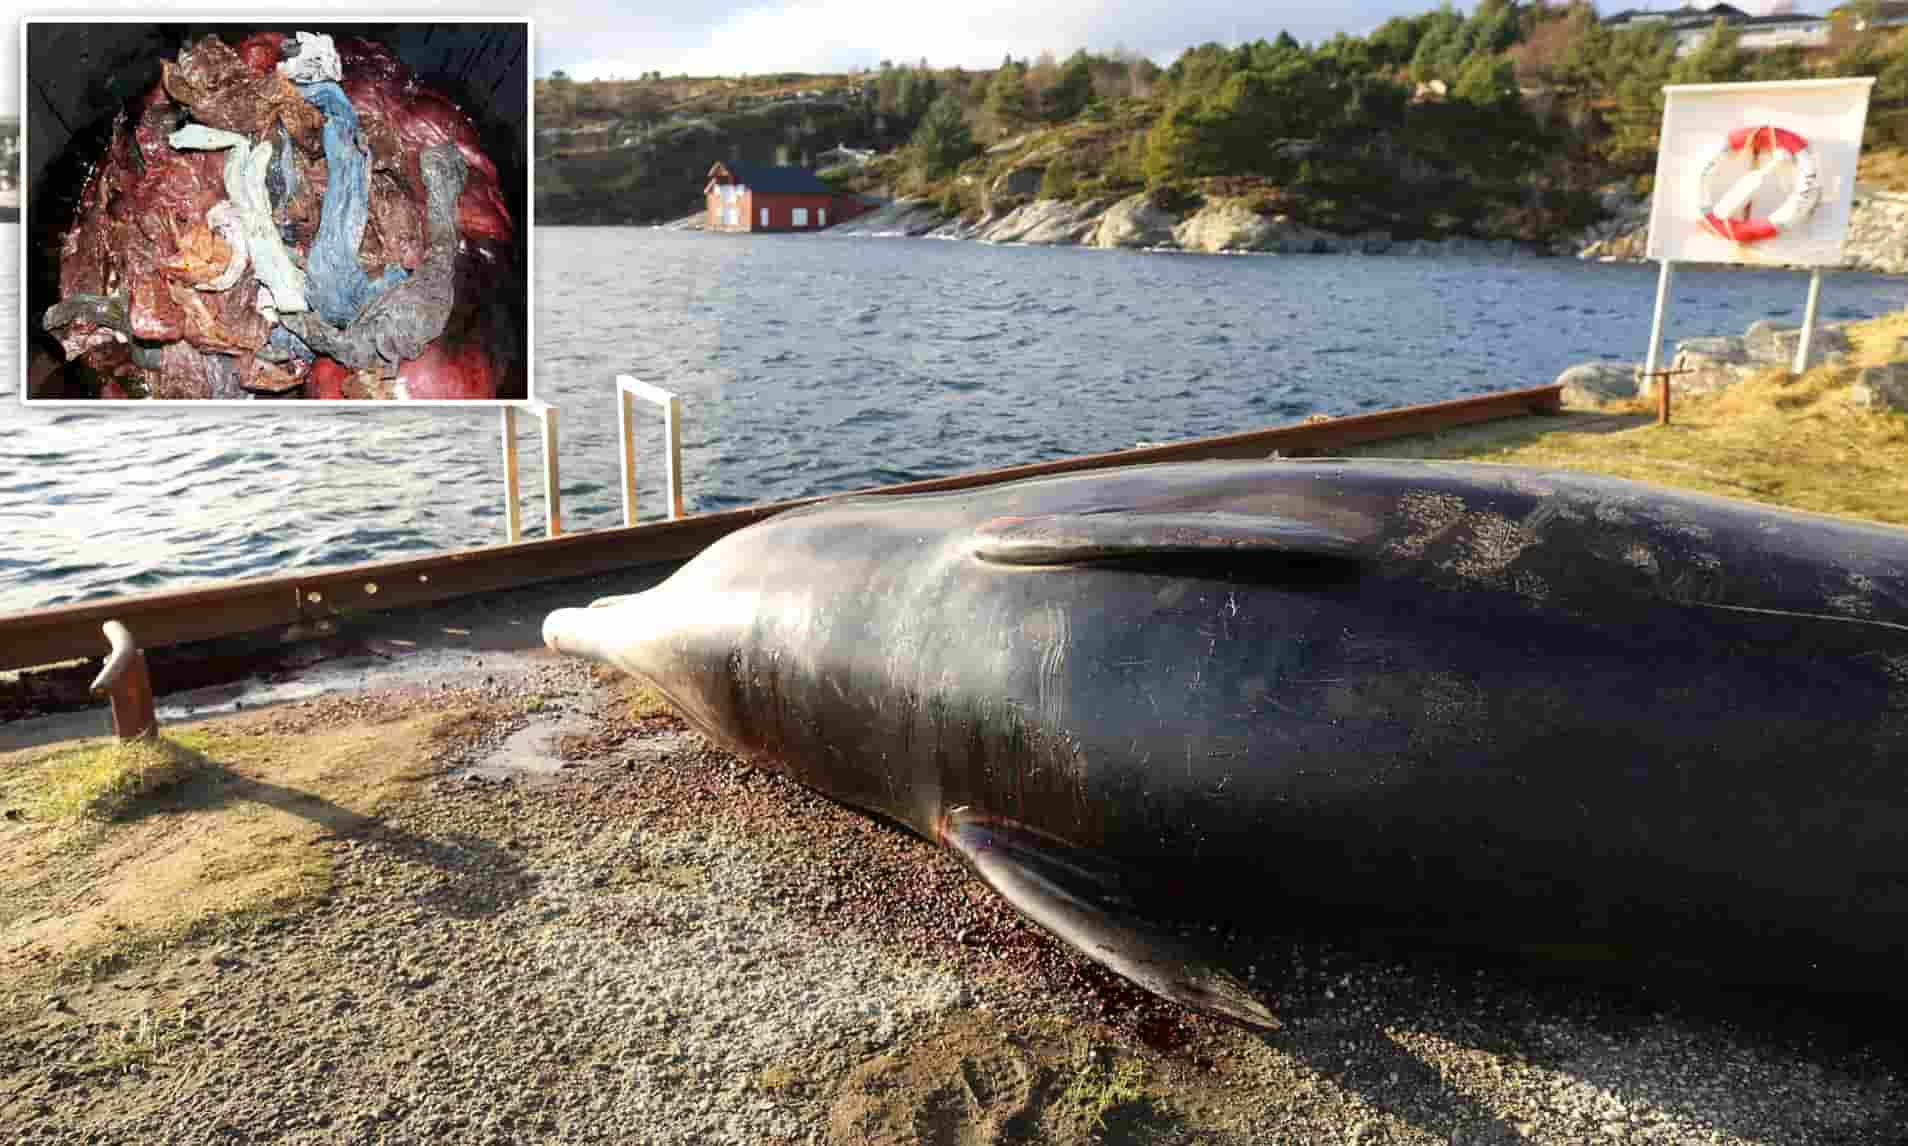 Whale Found Dead; More Than 30 Plastic Bags Found in its Stomach